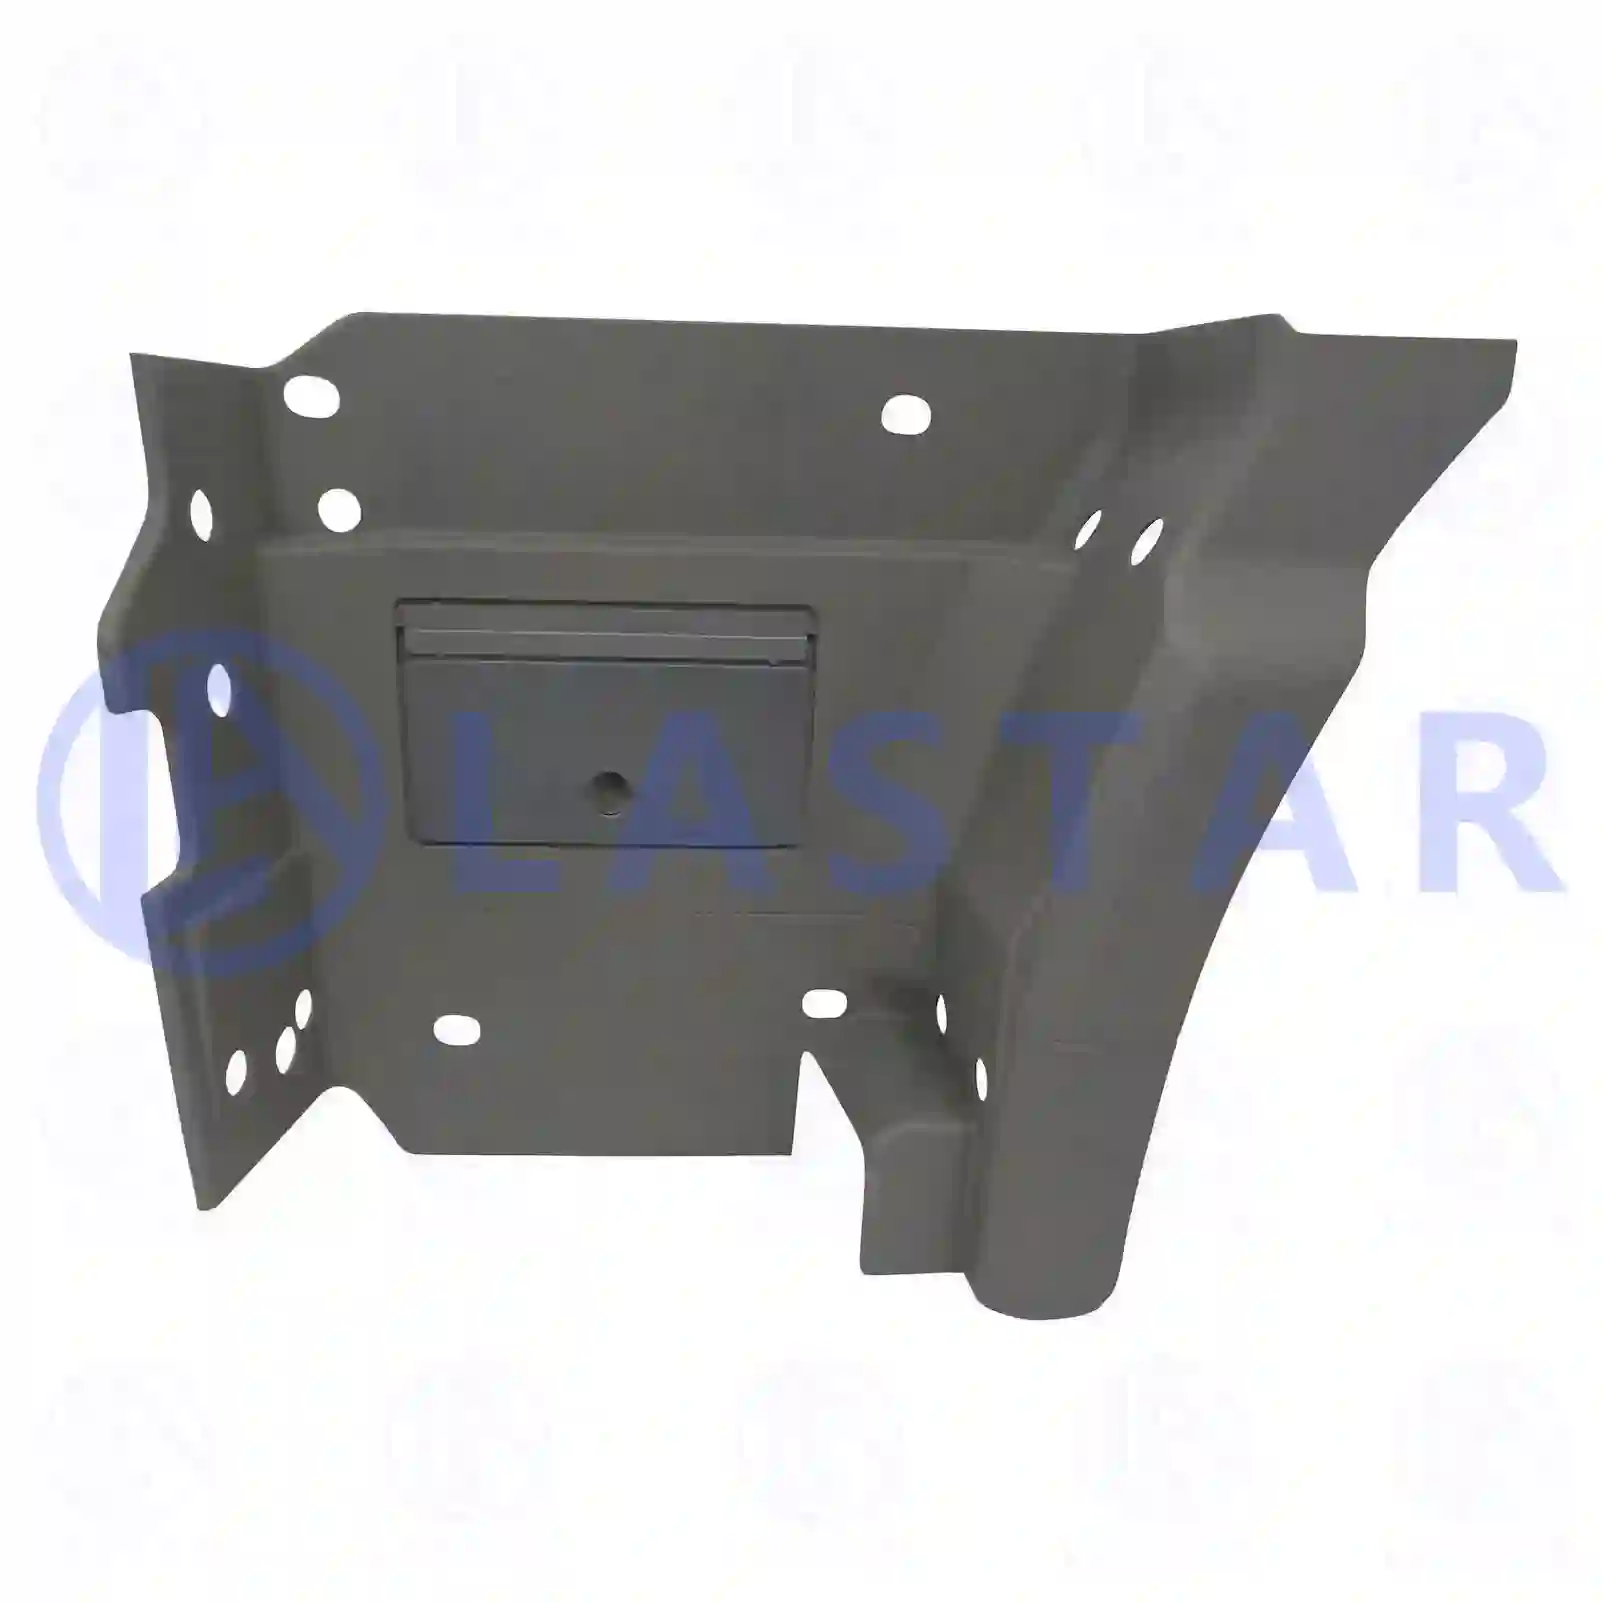 Step well case, left, 77719050, 9416603601 ||  77719050 Lastar Spare Part | Truck Spare Parts, Auotomotive Spare Parts Step well case, left, 77719050, 9416603601 ||  77719050 Lastar Spare Part | Truck Spare Parts, Auotomotive Spare Parts